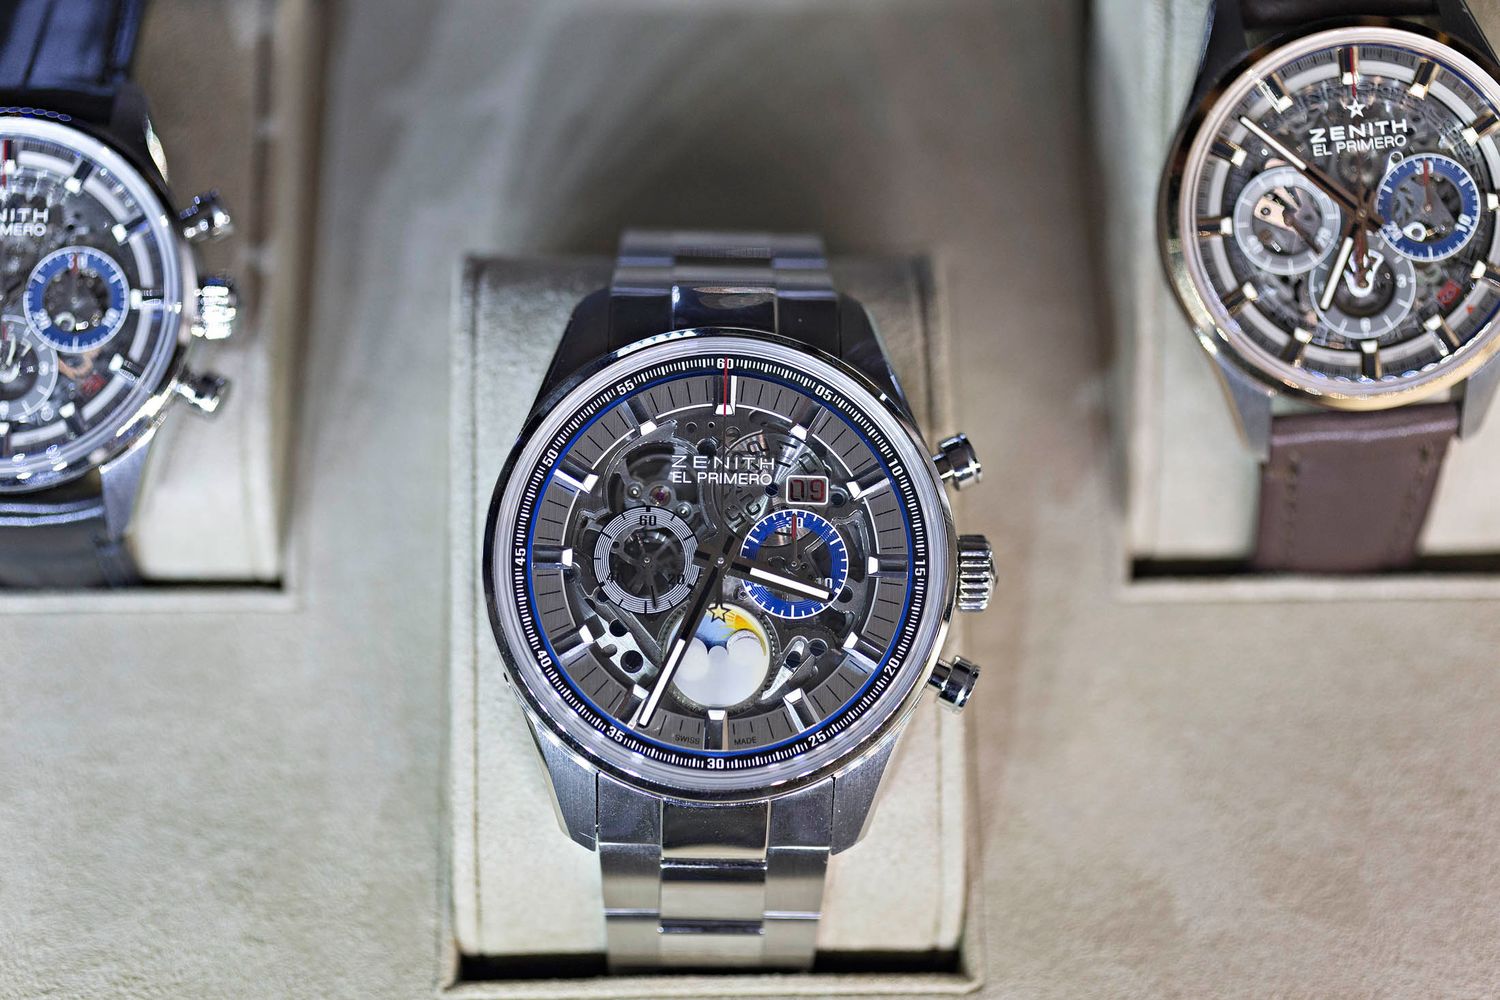 These El Primero wristwatches on display at the headquarters sell for over US$4,000. Like the Pilot watches, El Primeros are a key product line for Zenith.